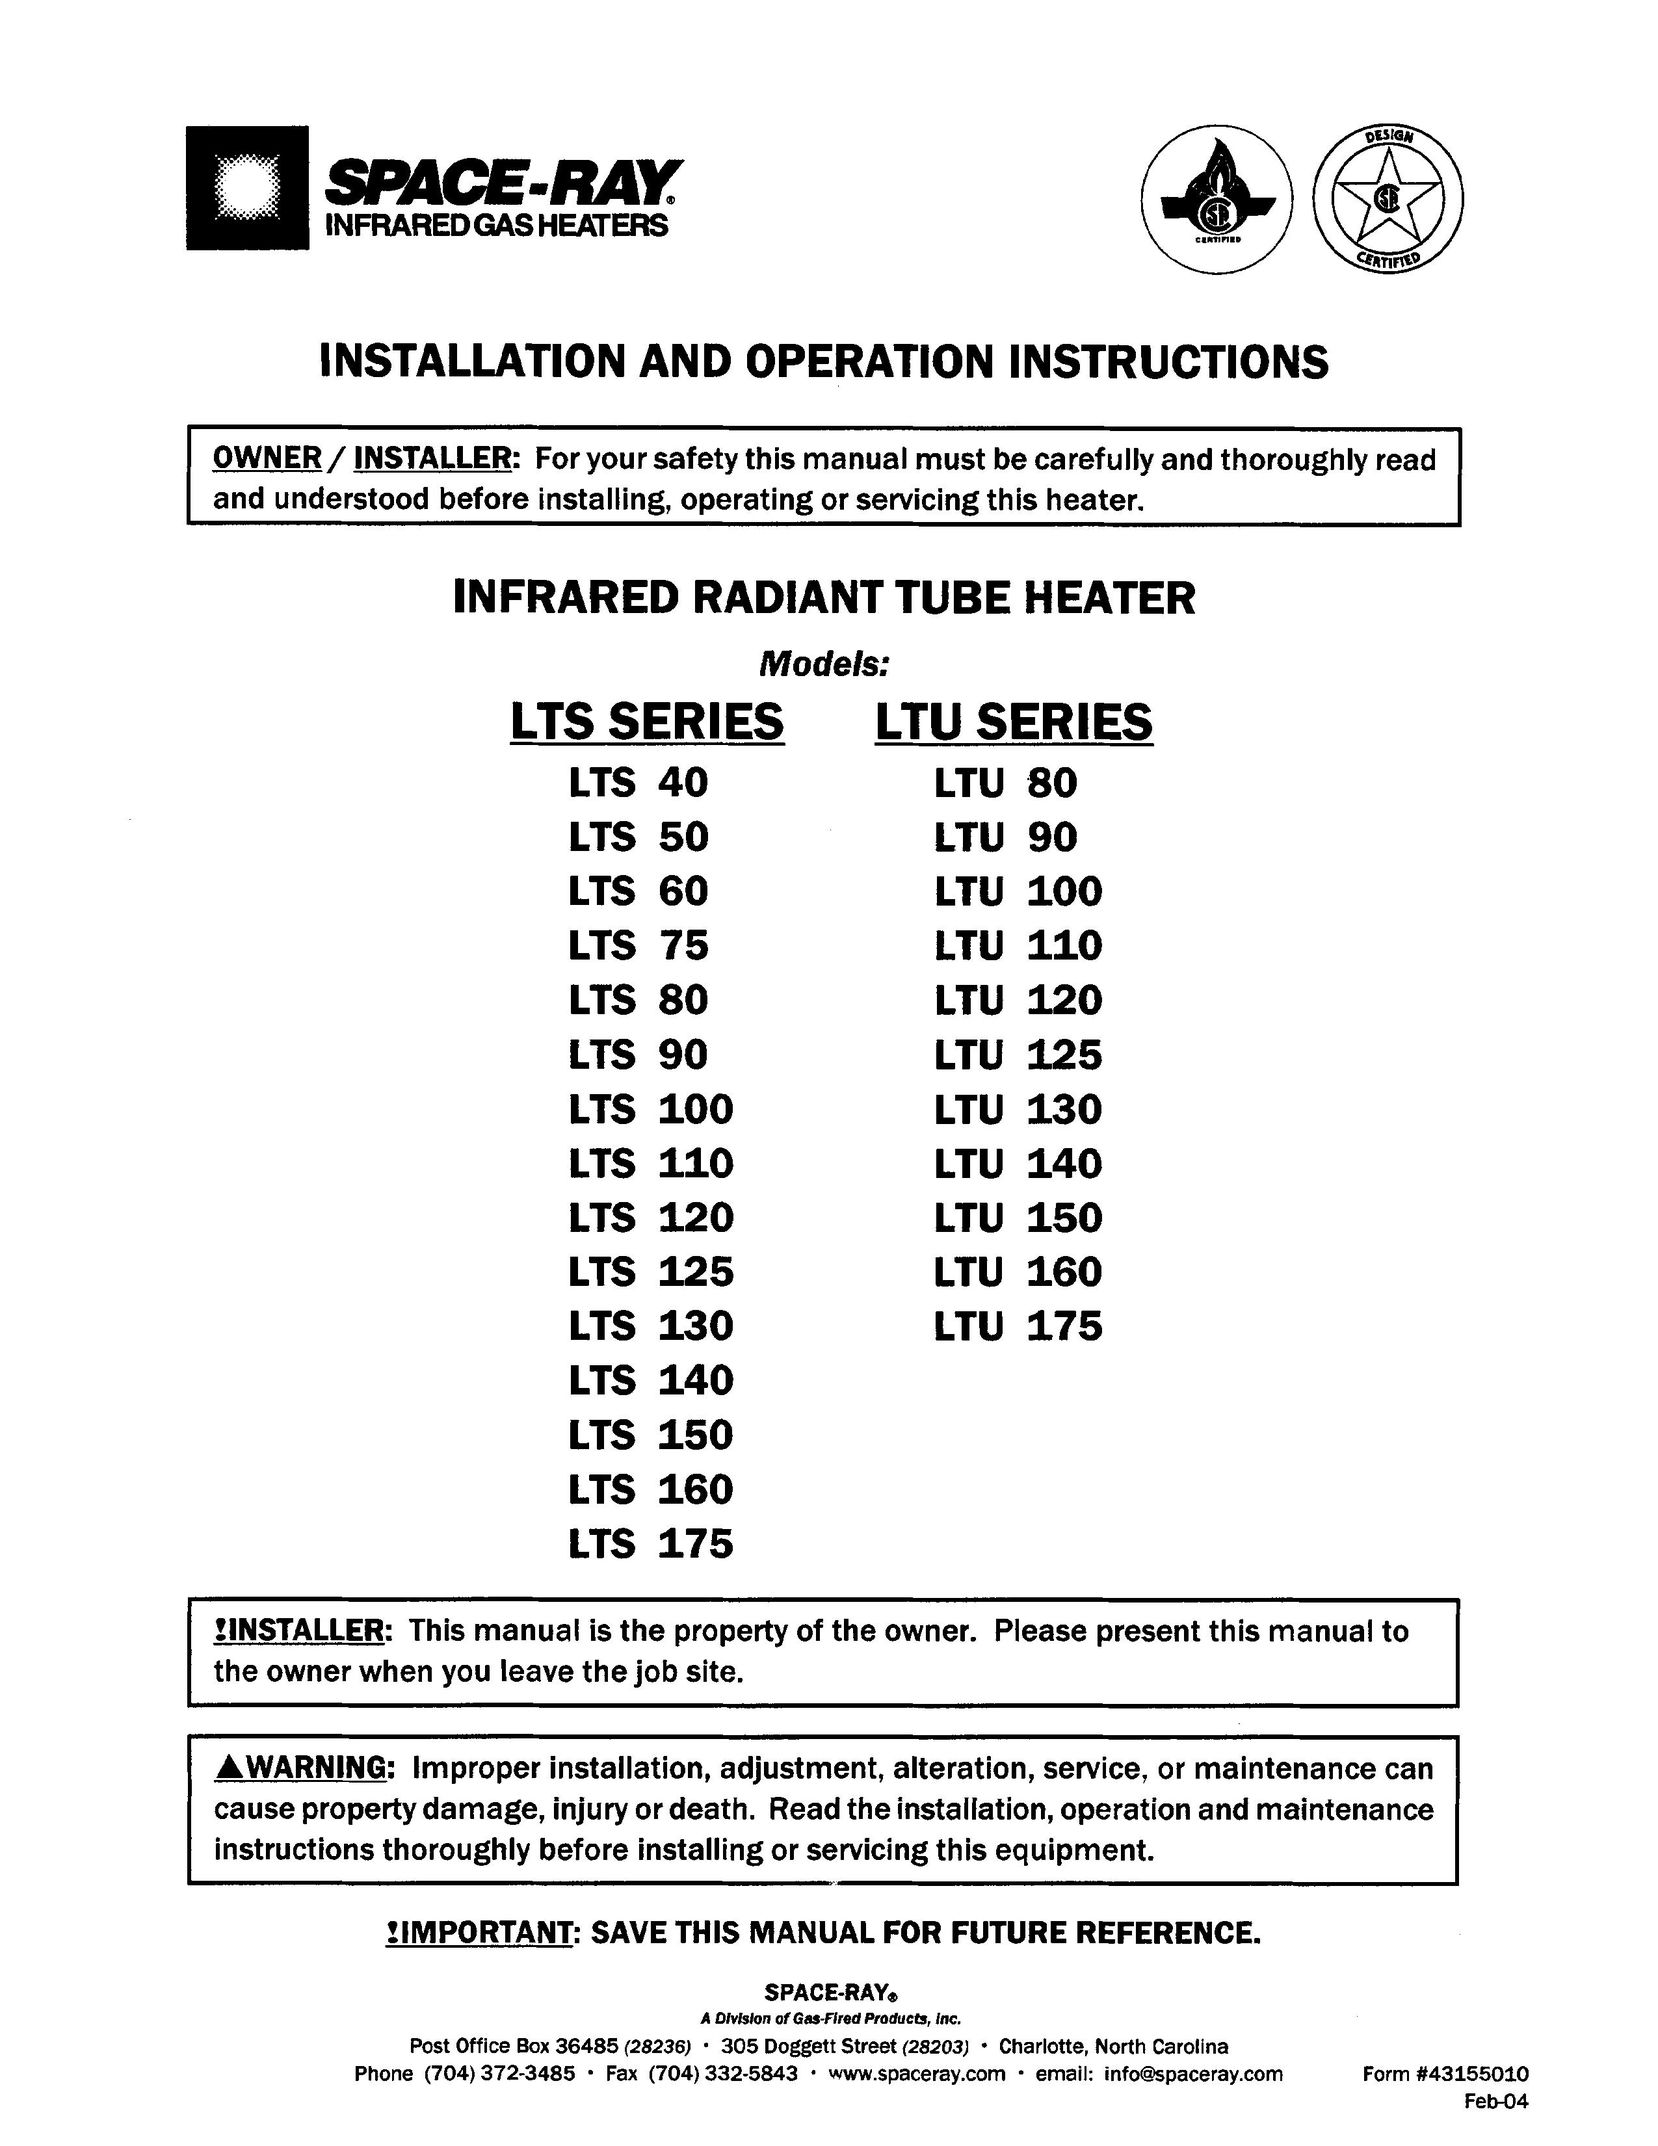 Gas-Fired Products LTU 120 Electric Heater User Manual